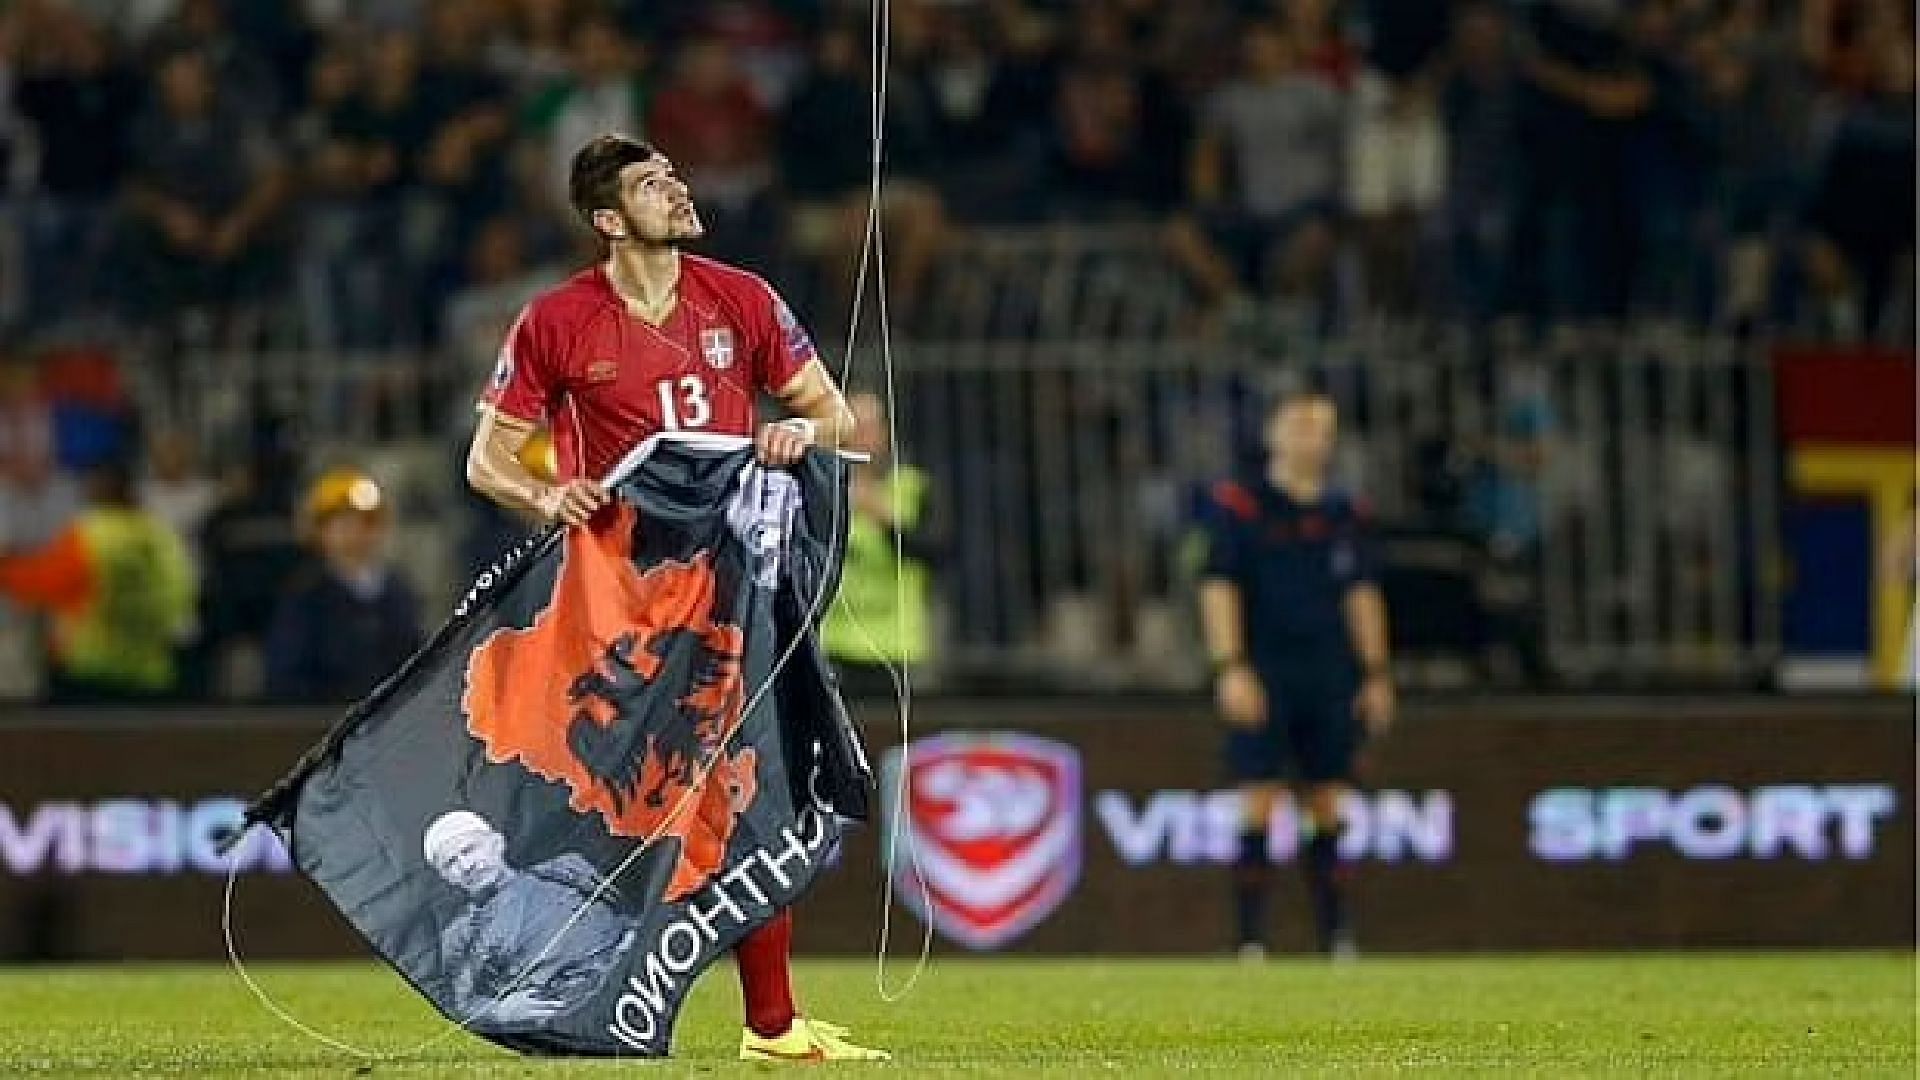 When Greater Albania&#039;s flag was flown above the stadium during the Euro 2016 qualifying match last year, Serbia&#039;s Stefan Mitrovic grabbed it. Photograph by Marko Djurica for Reuters.